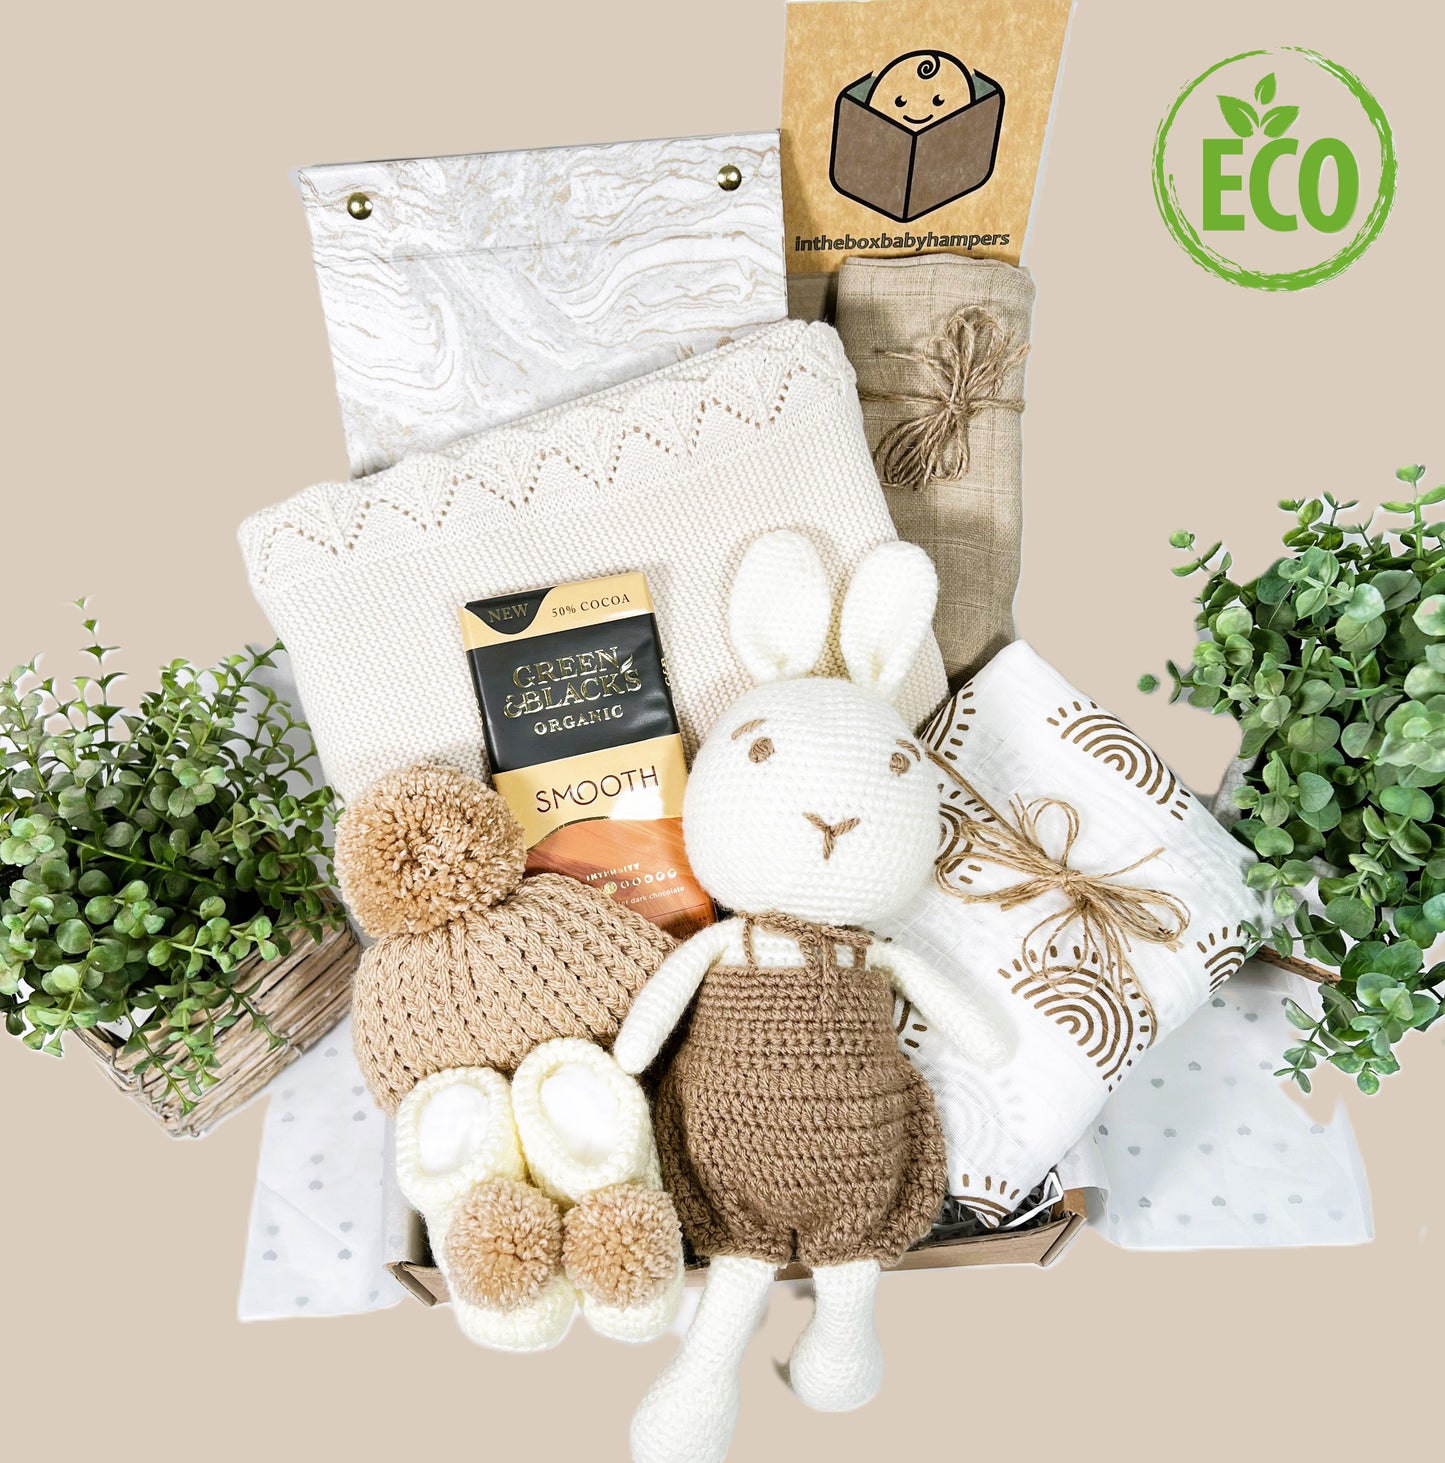 Eco Friendly neutral new baby gift hamper box with a crocheted bunny in brown dungarees abd a hand stitched face, a soft cotton baby blanket, a large white muslin with brown printed suns, a pair of cream crochetd baby booties and knitted baby pompom hat.